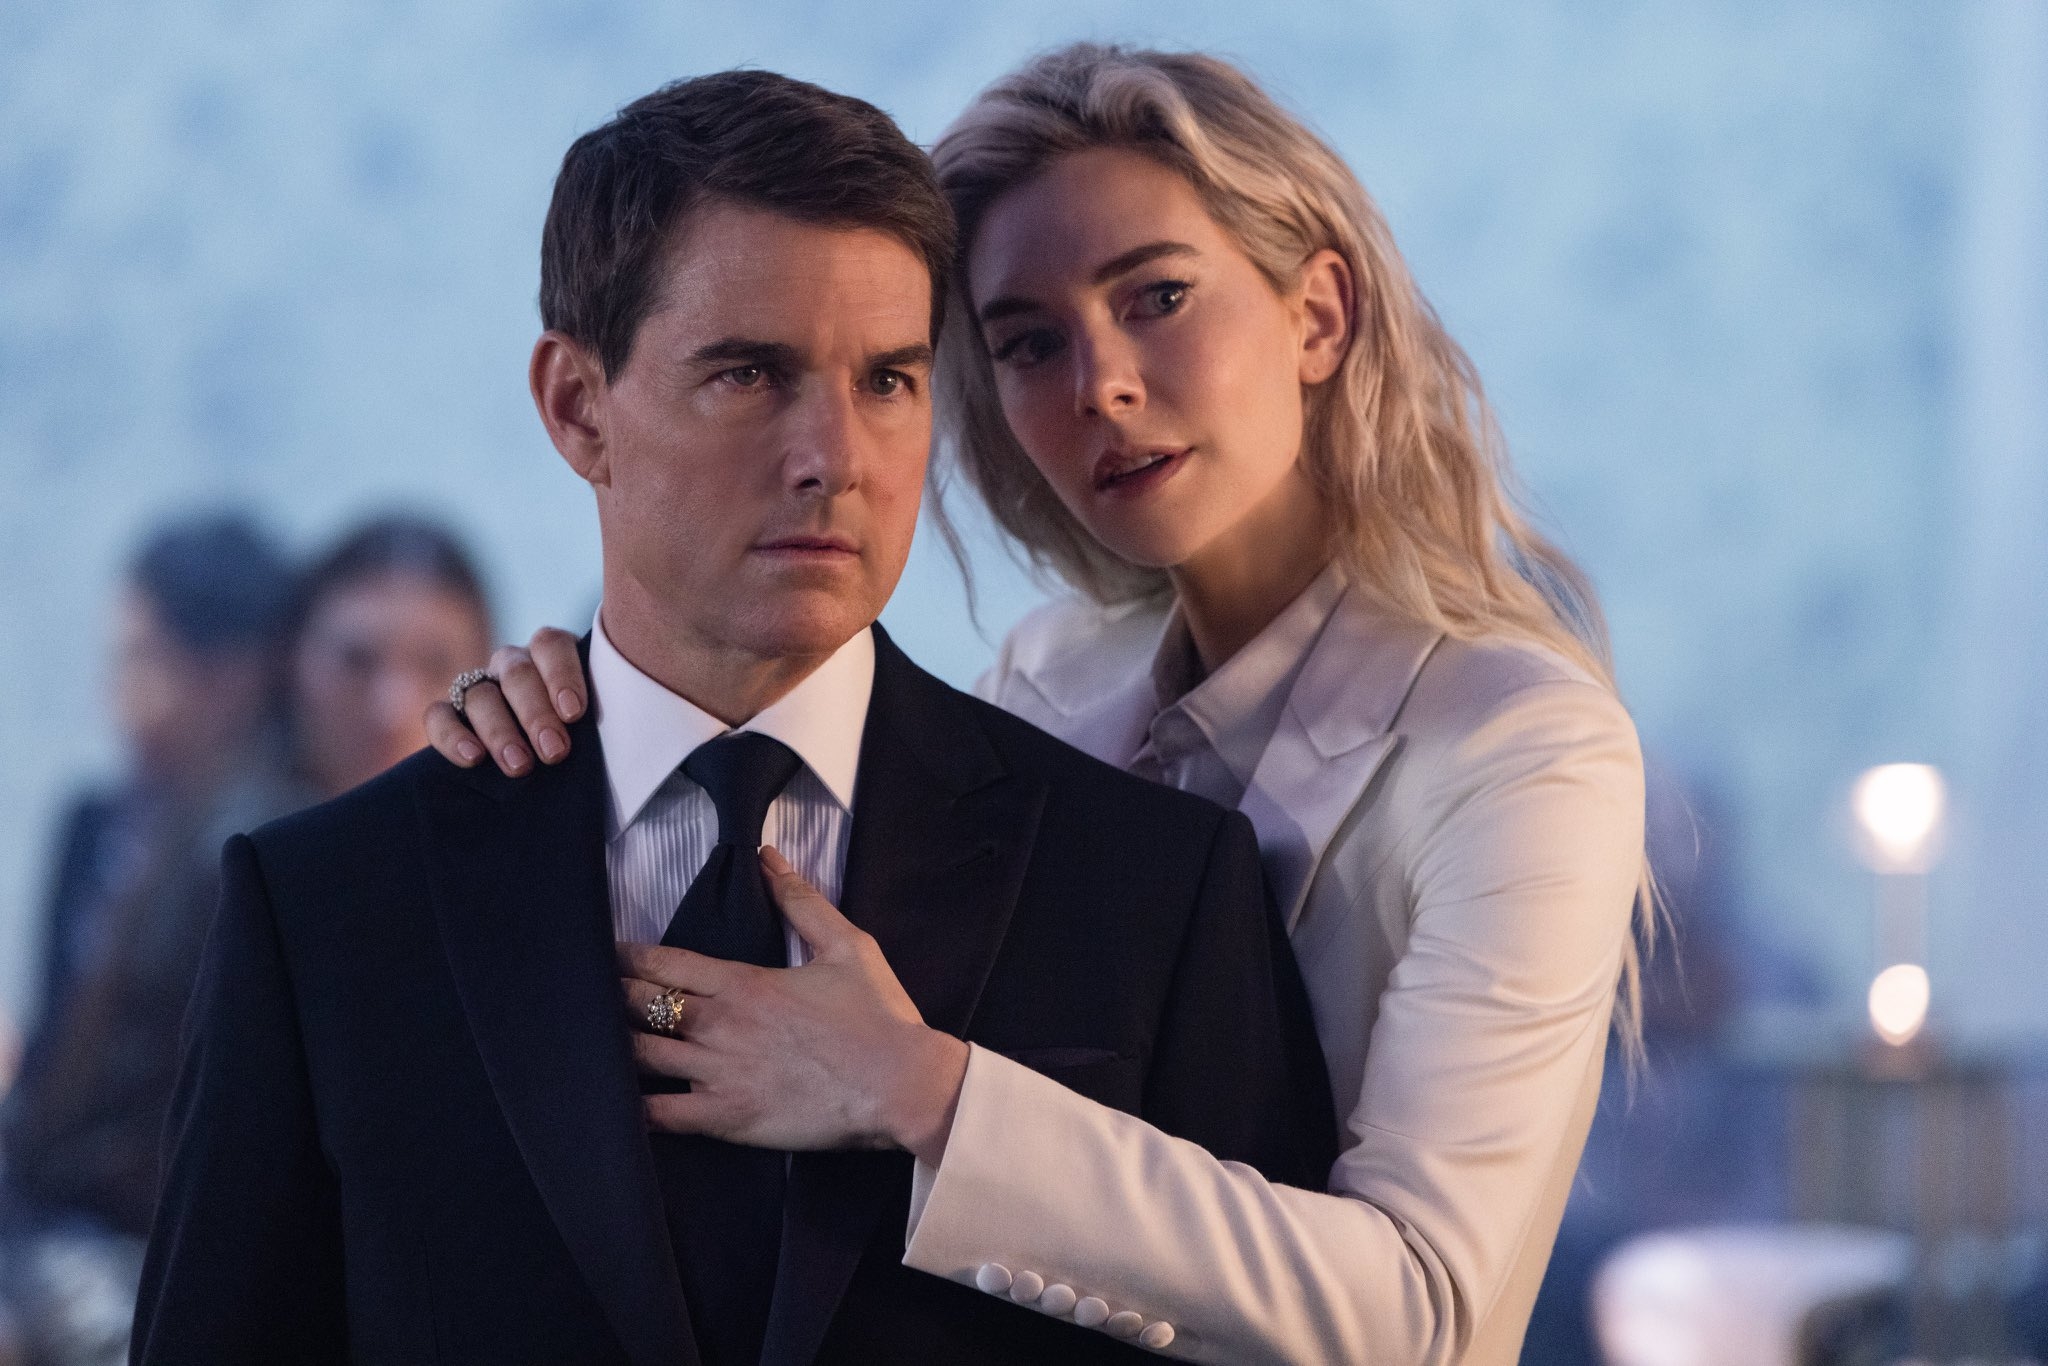 Summer movie preview: 'Mission: Impossible', 'Indiana Jones' and more |  Toronto Sun